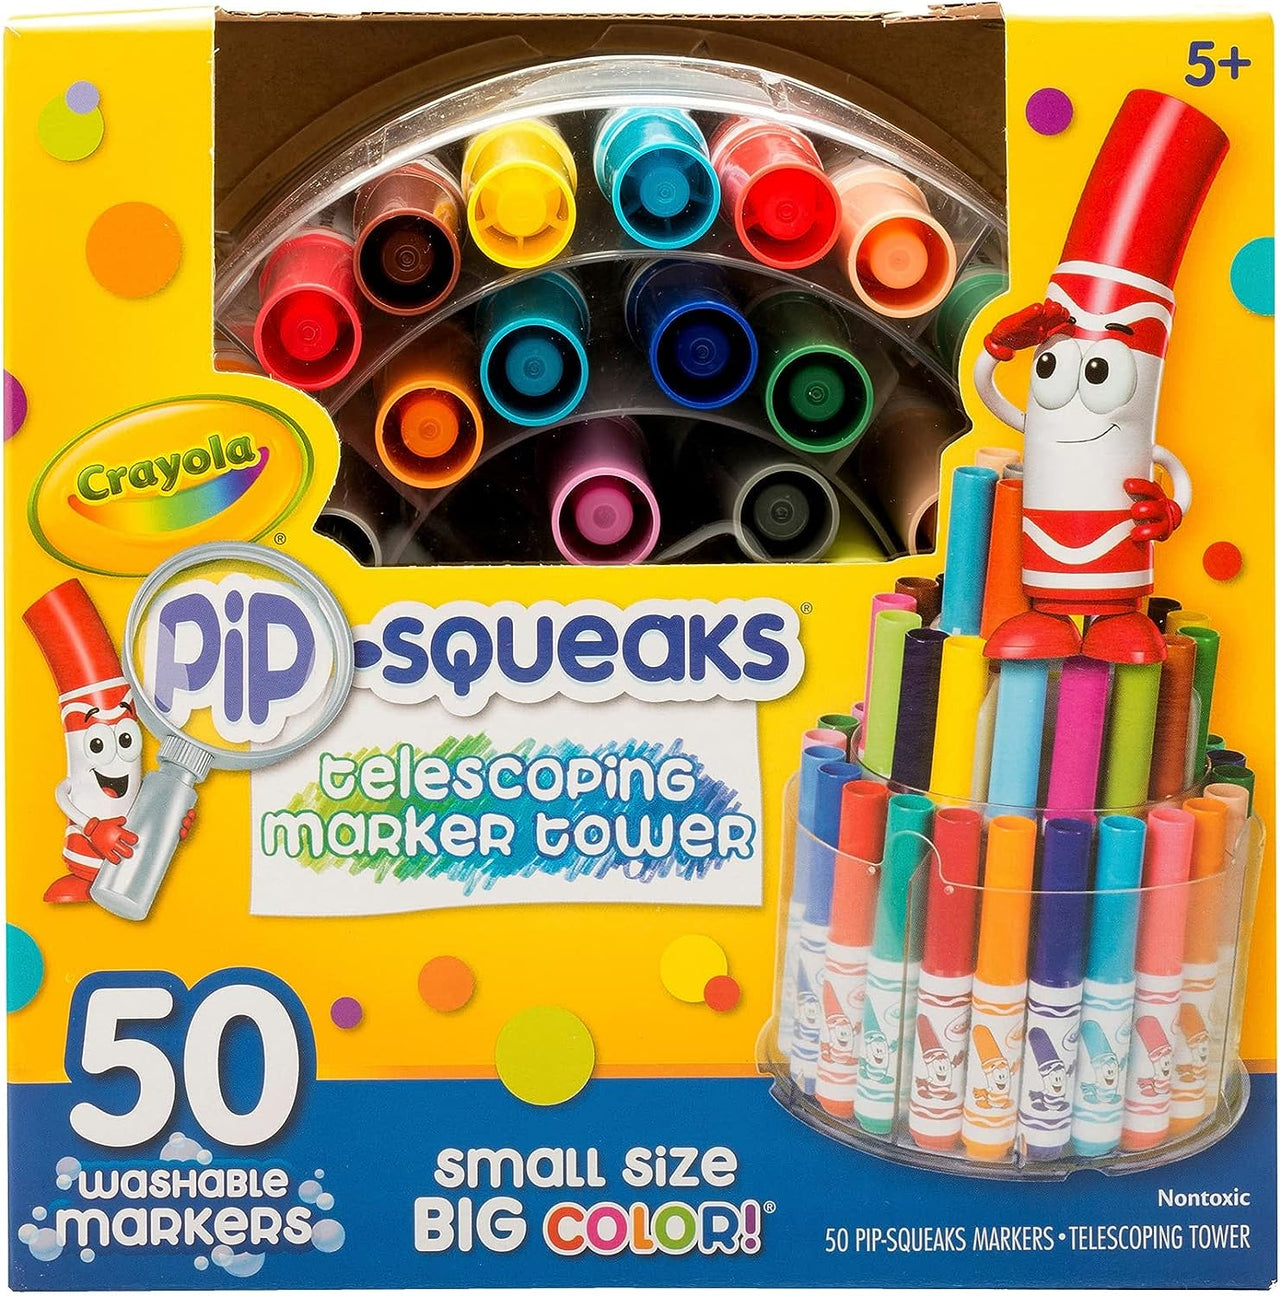 Crayola 50 Washable Markers Pip-squeaks